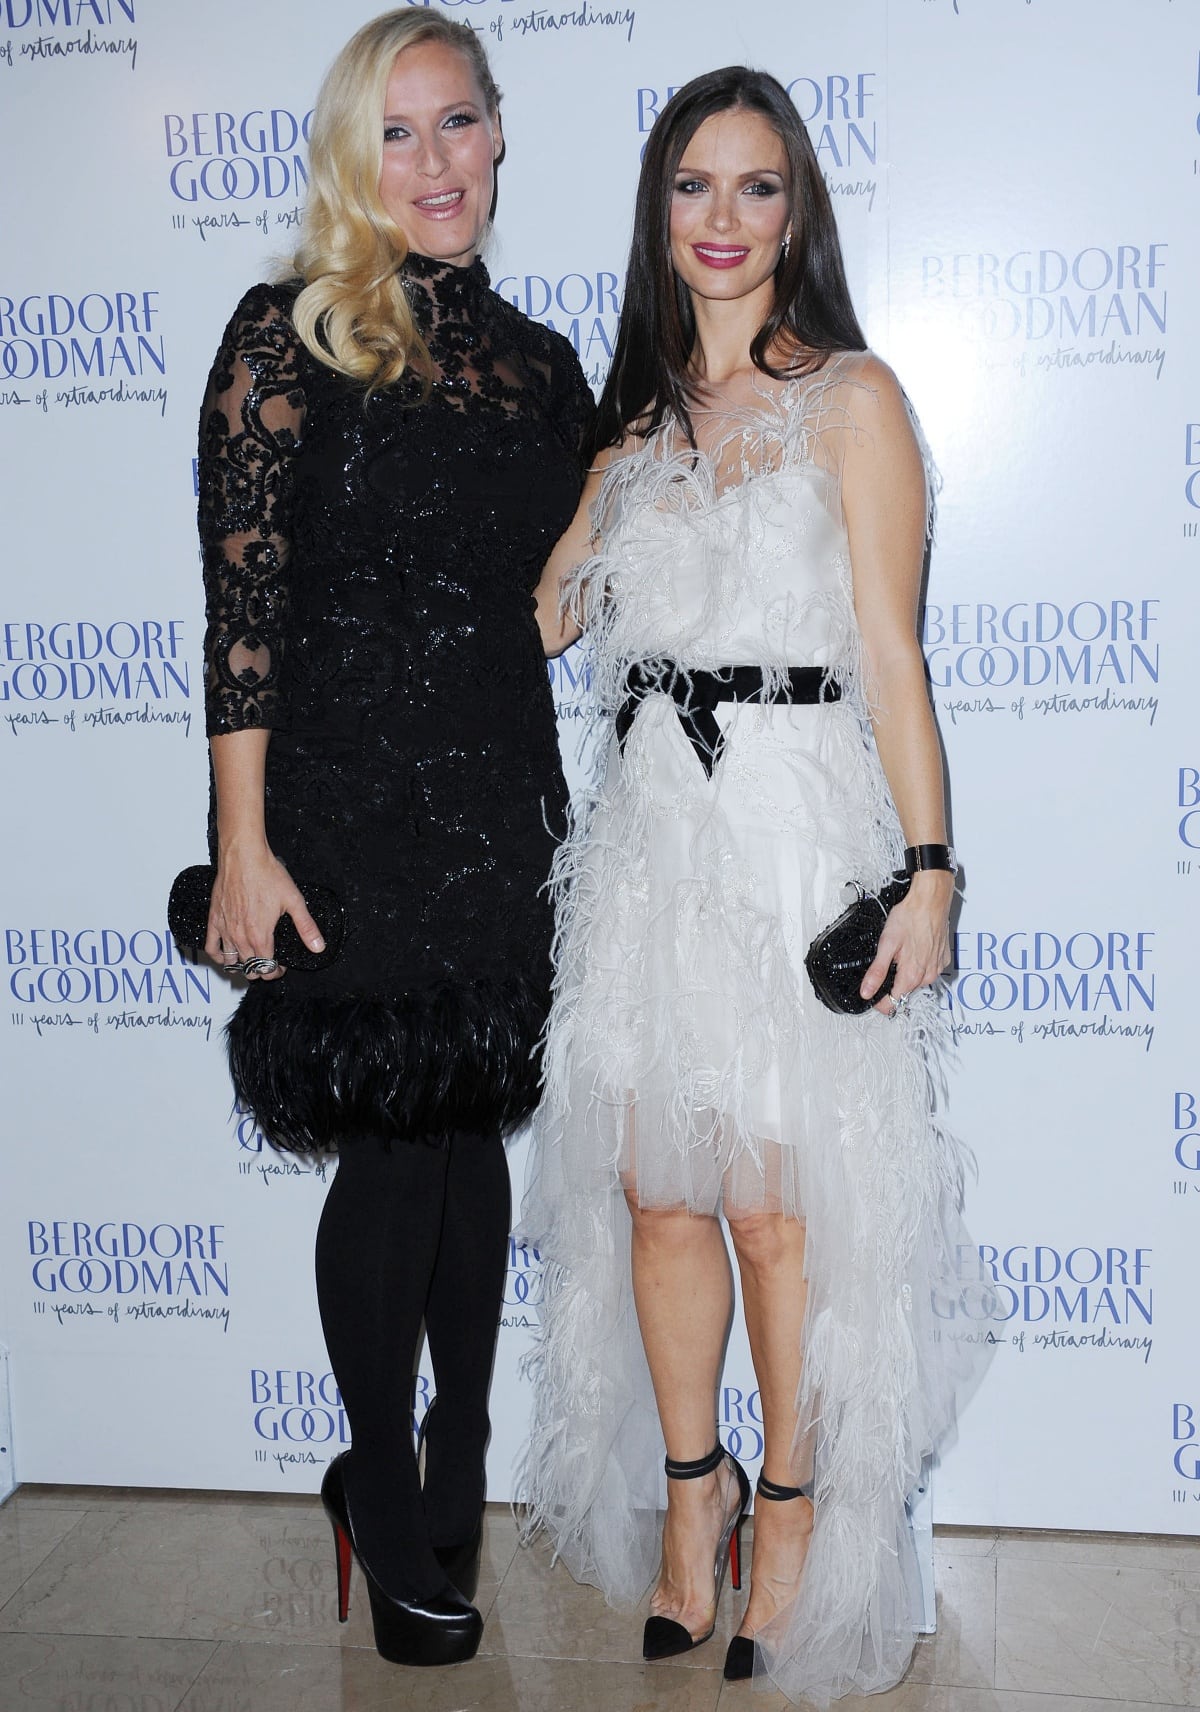 Georgina Chapman co-founded the high-end fashion label Marchesa with fashion designer and business partner Keren Craig in 2004